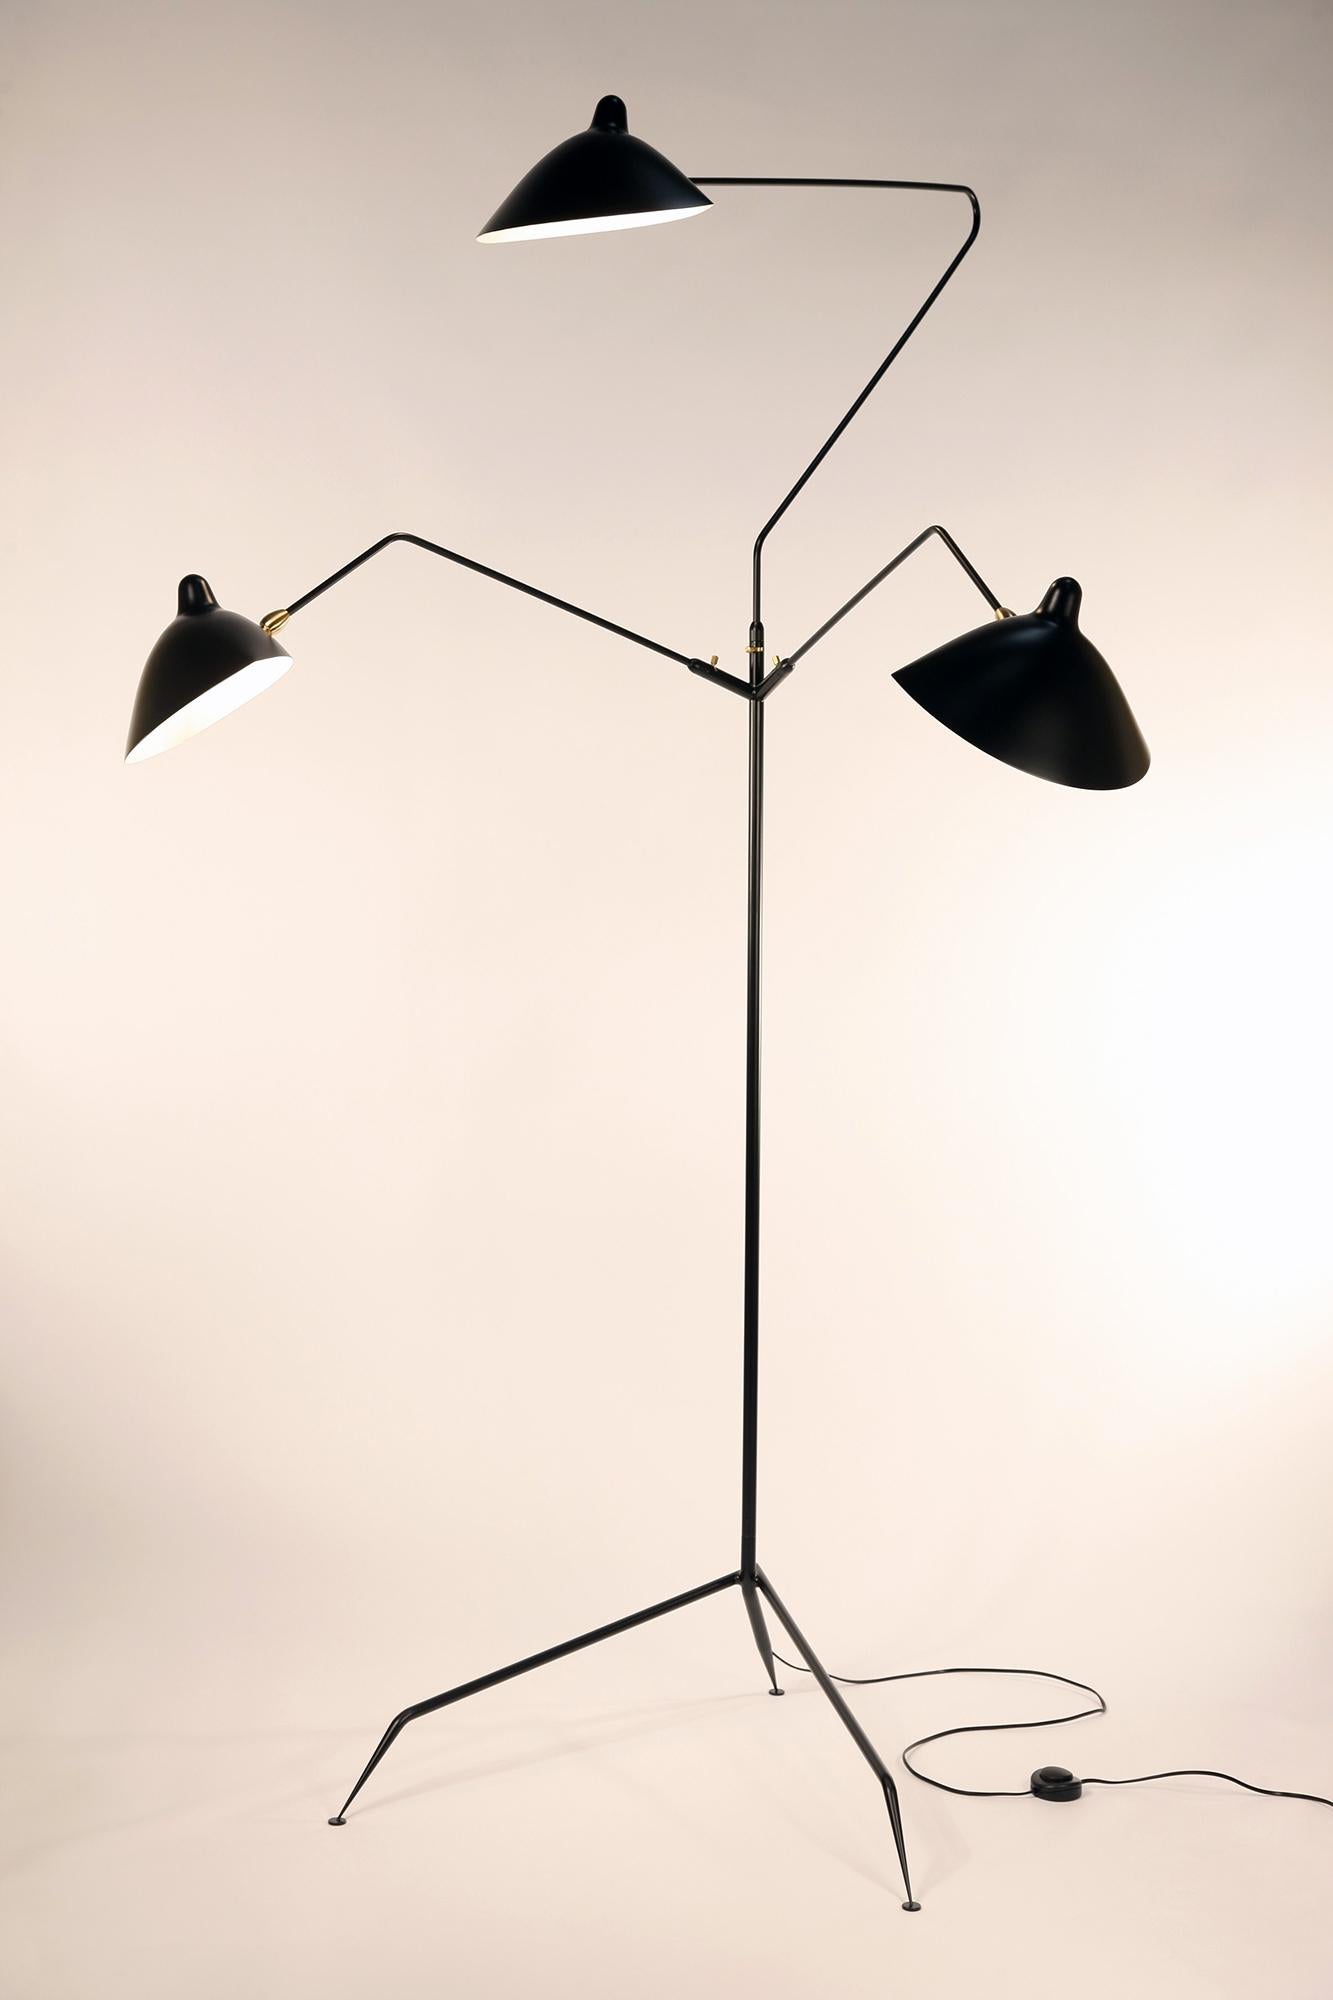 DESCRIPTION: 
This is the most versatile lamp of the Mouille collection. Each ‘chapeau’ shade can be oriented differently. Sculptural in form with three rotating arms, it stands majestically on a tripod base ending with tapered legs. 

FEATURES:
3